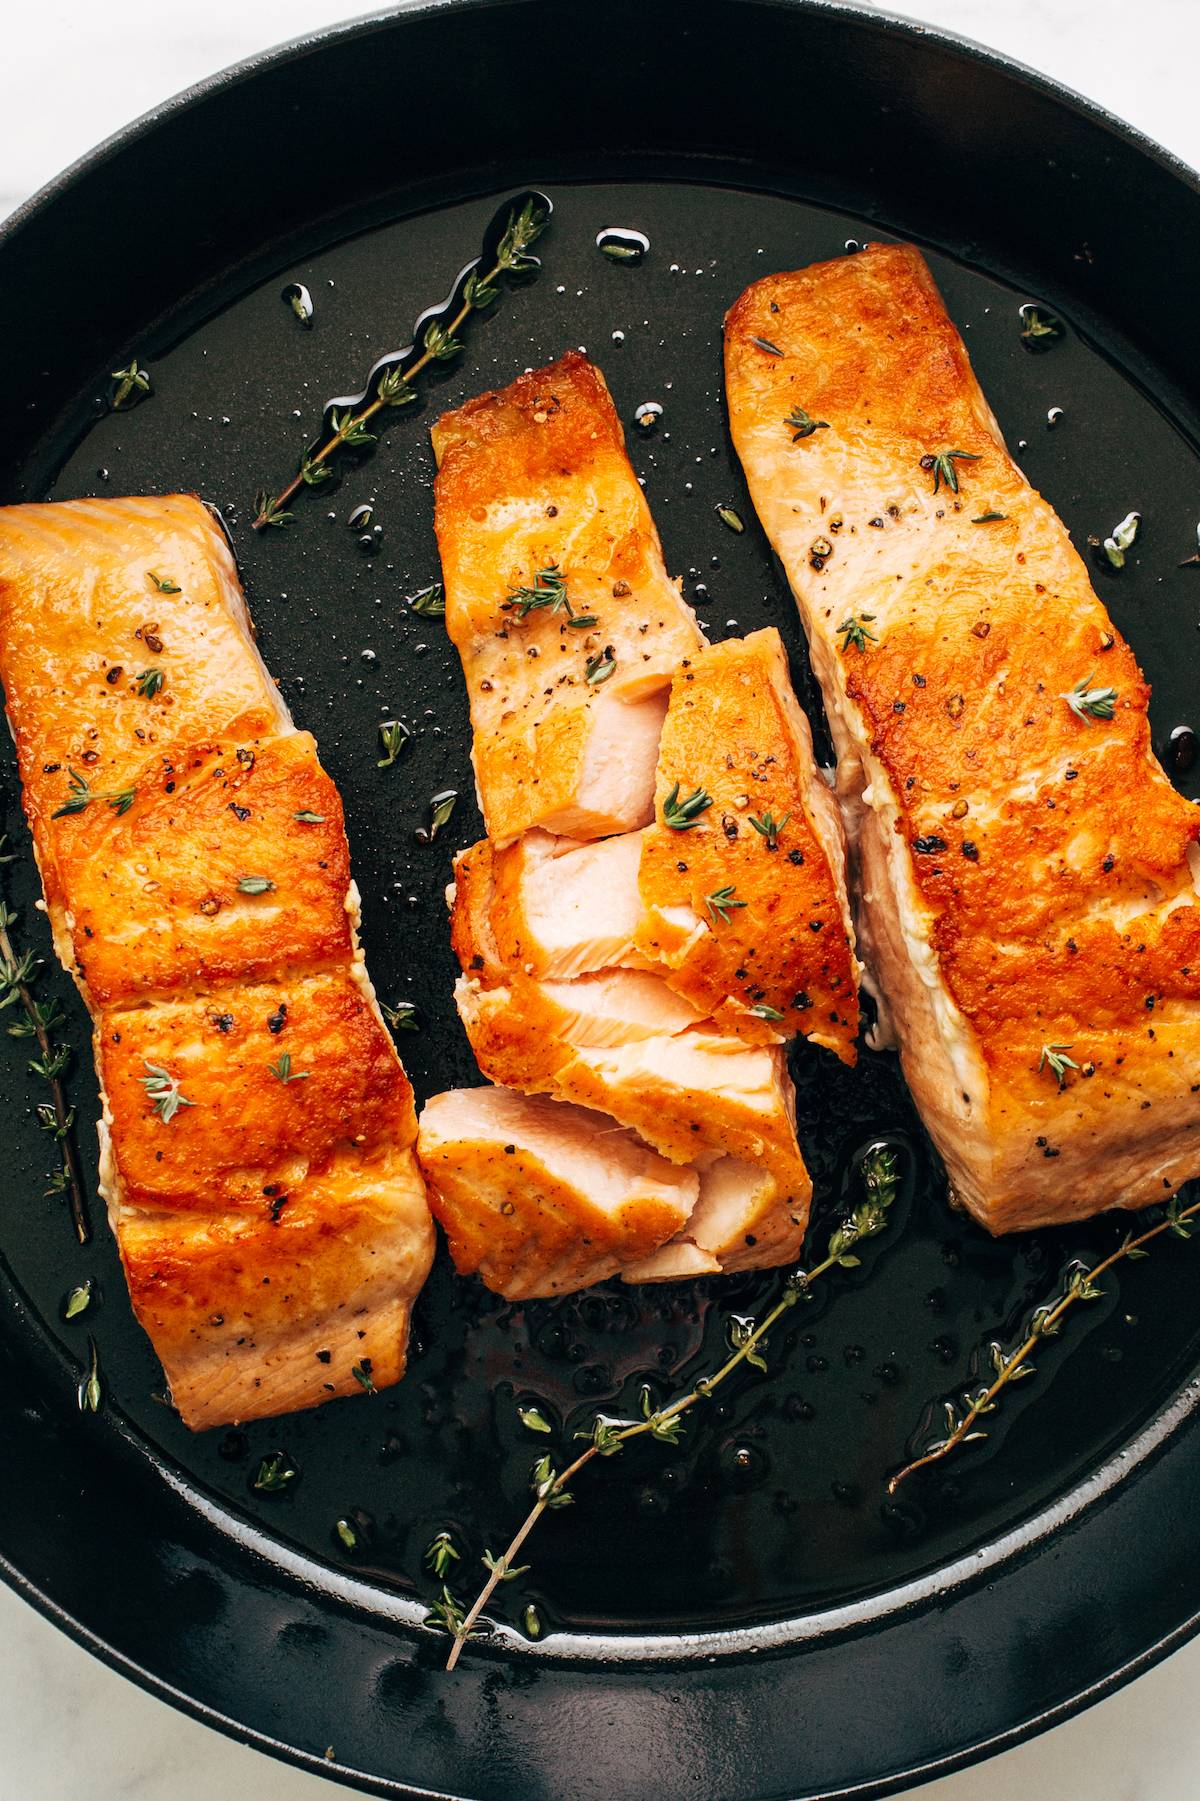 Three fillets of salmon in a skillet with the salmon flaked.